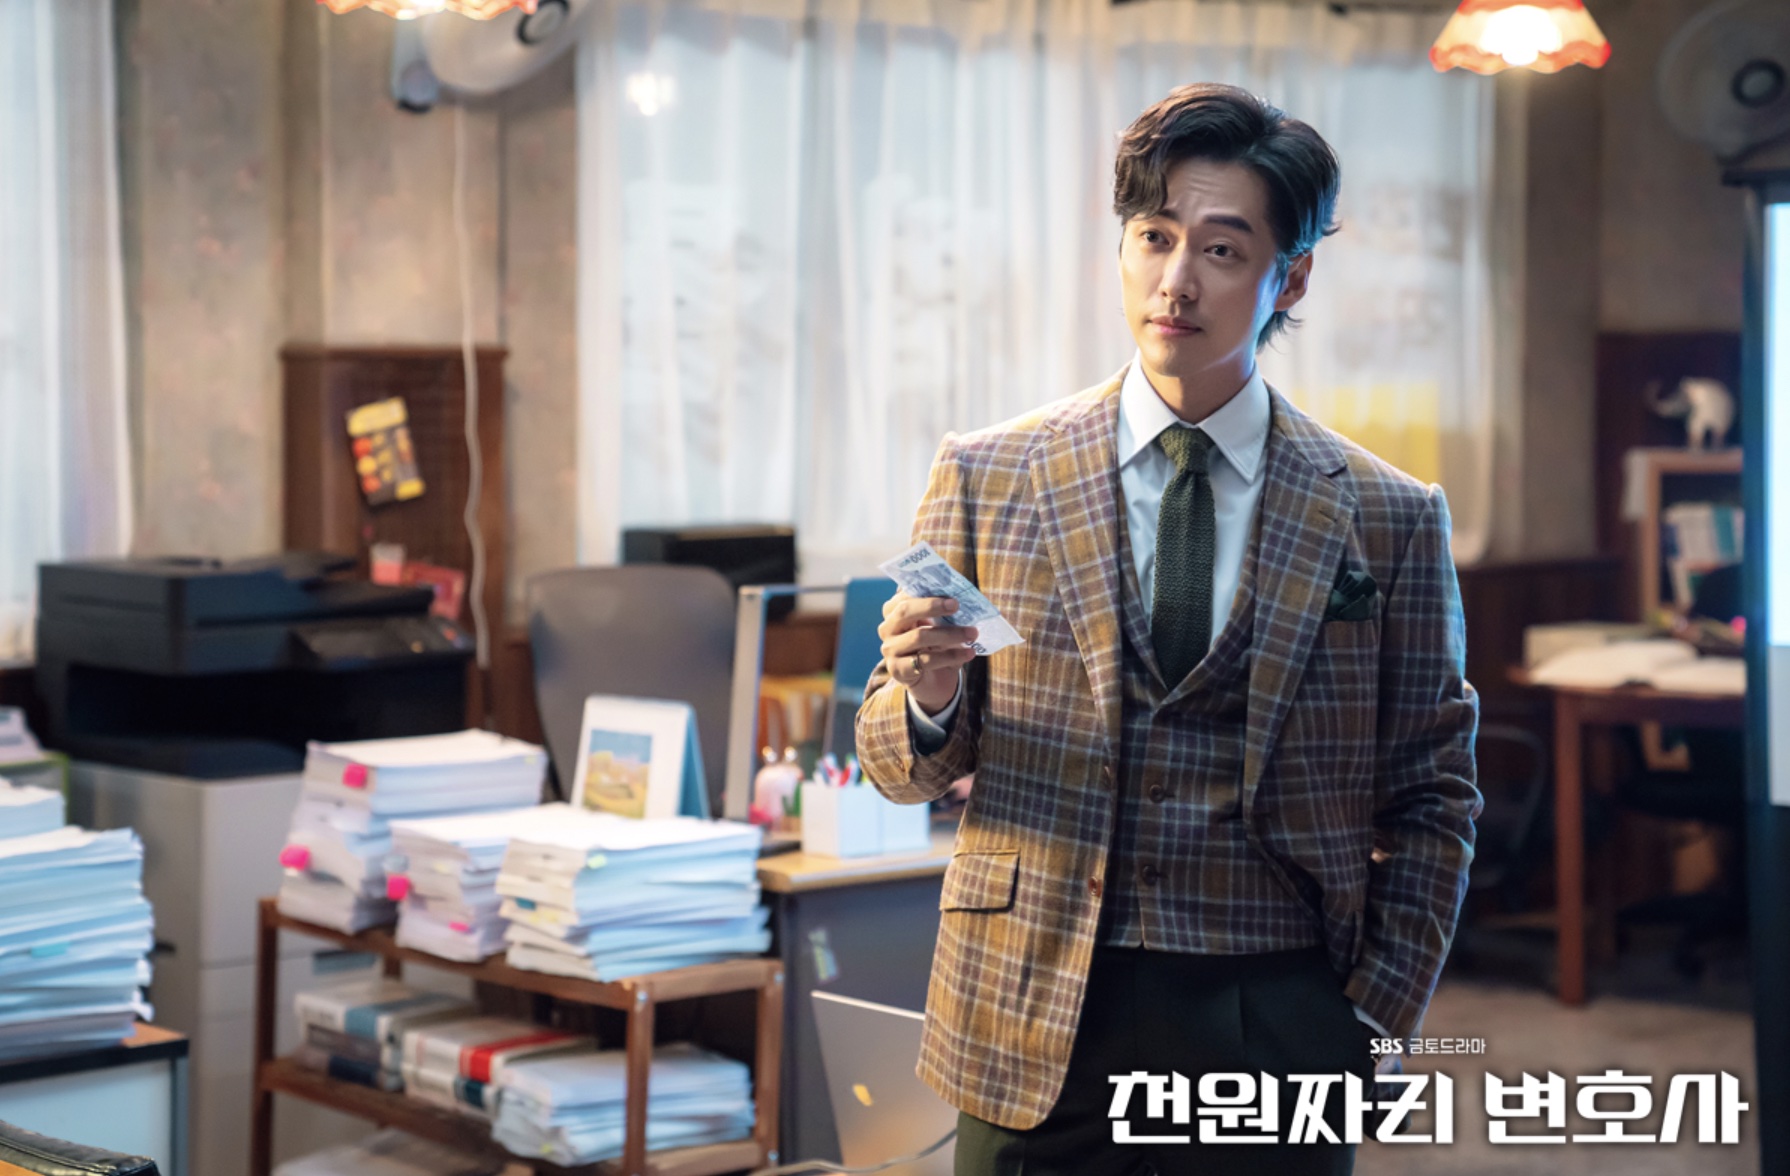 Namgoong Min fights for affordable justice in One Dollar Lawyer